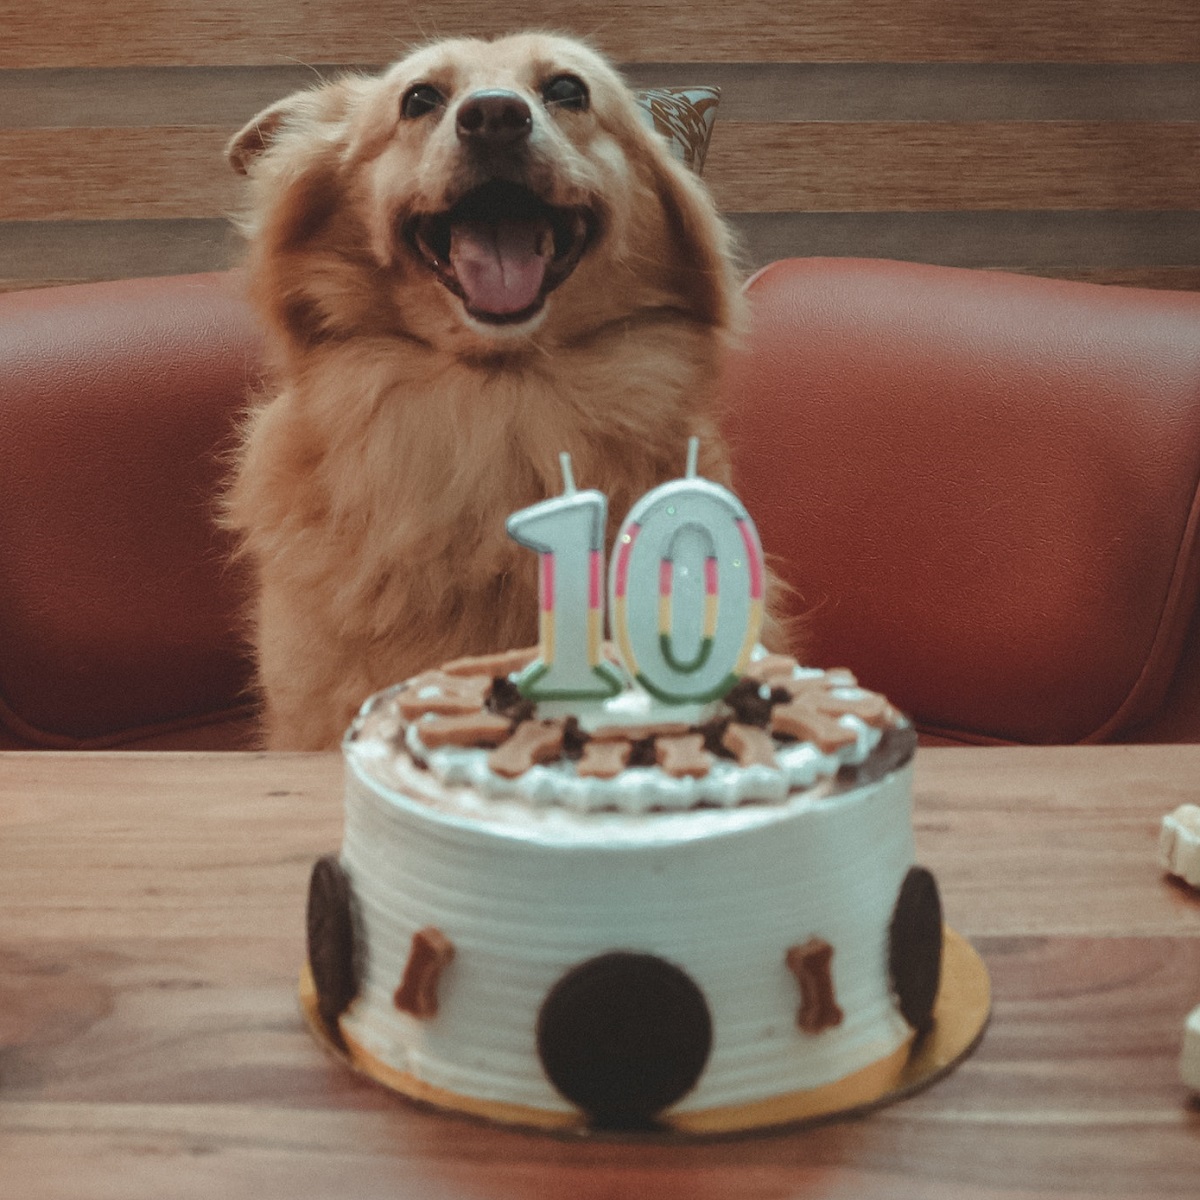 smiling-golden-retriever-dog-in-front-of-birthday-cake-with-a-10-candle-on-top